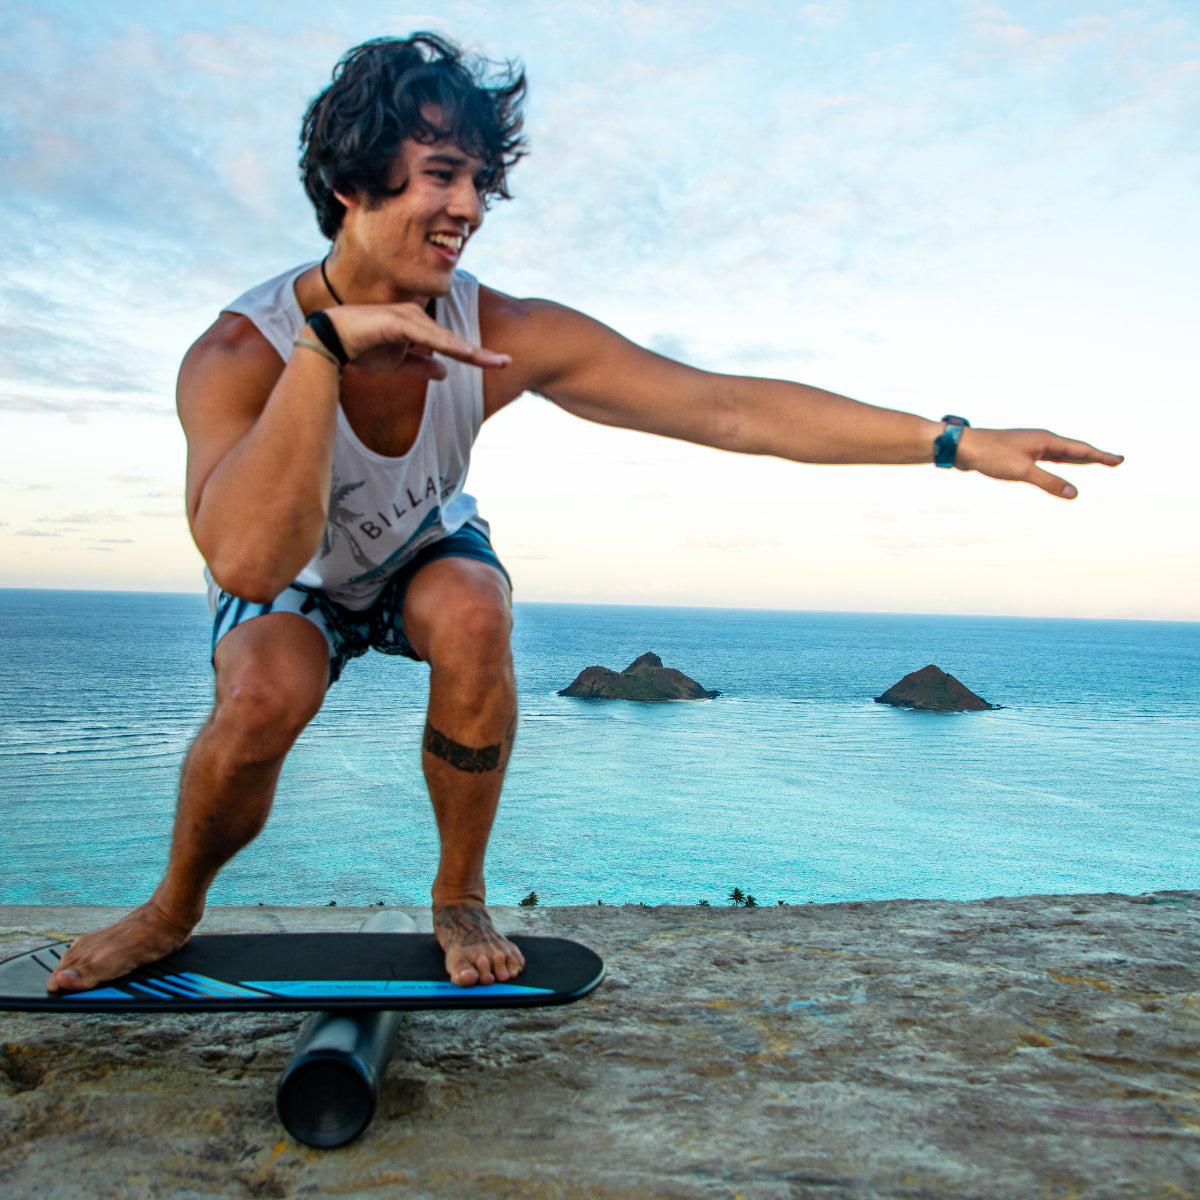 A man effortlessly glides on a Revolution Swell 2.0 Balance Board, displaying amazing balance and control.